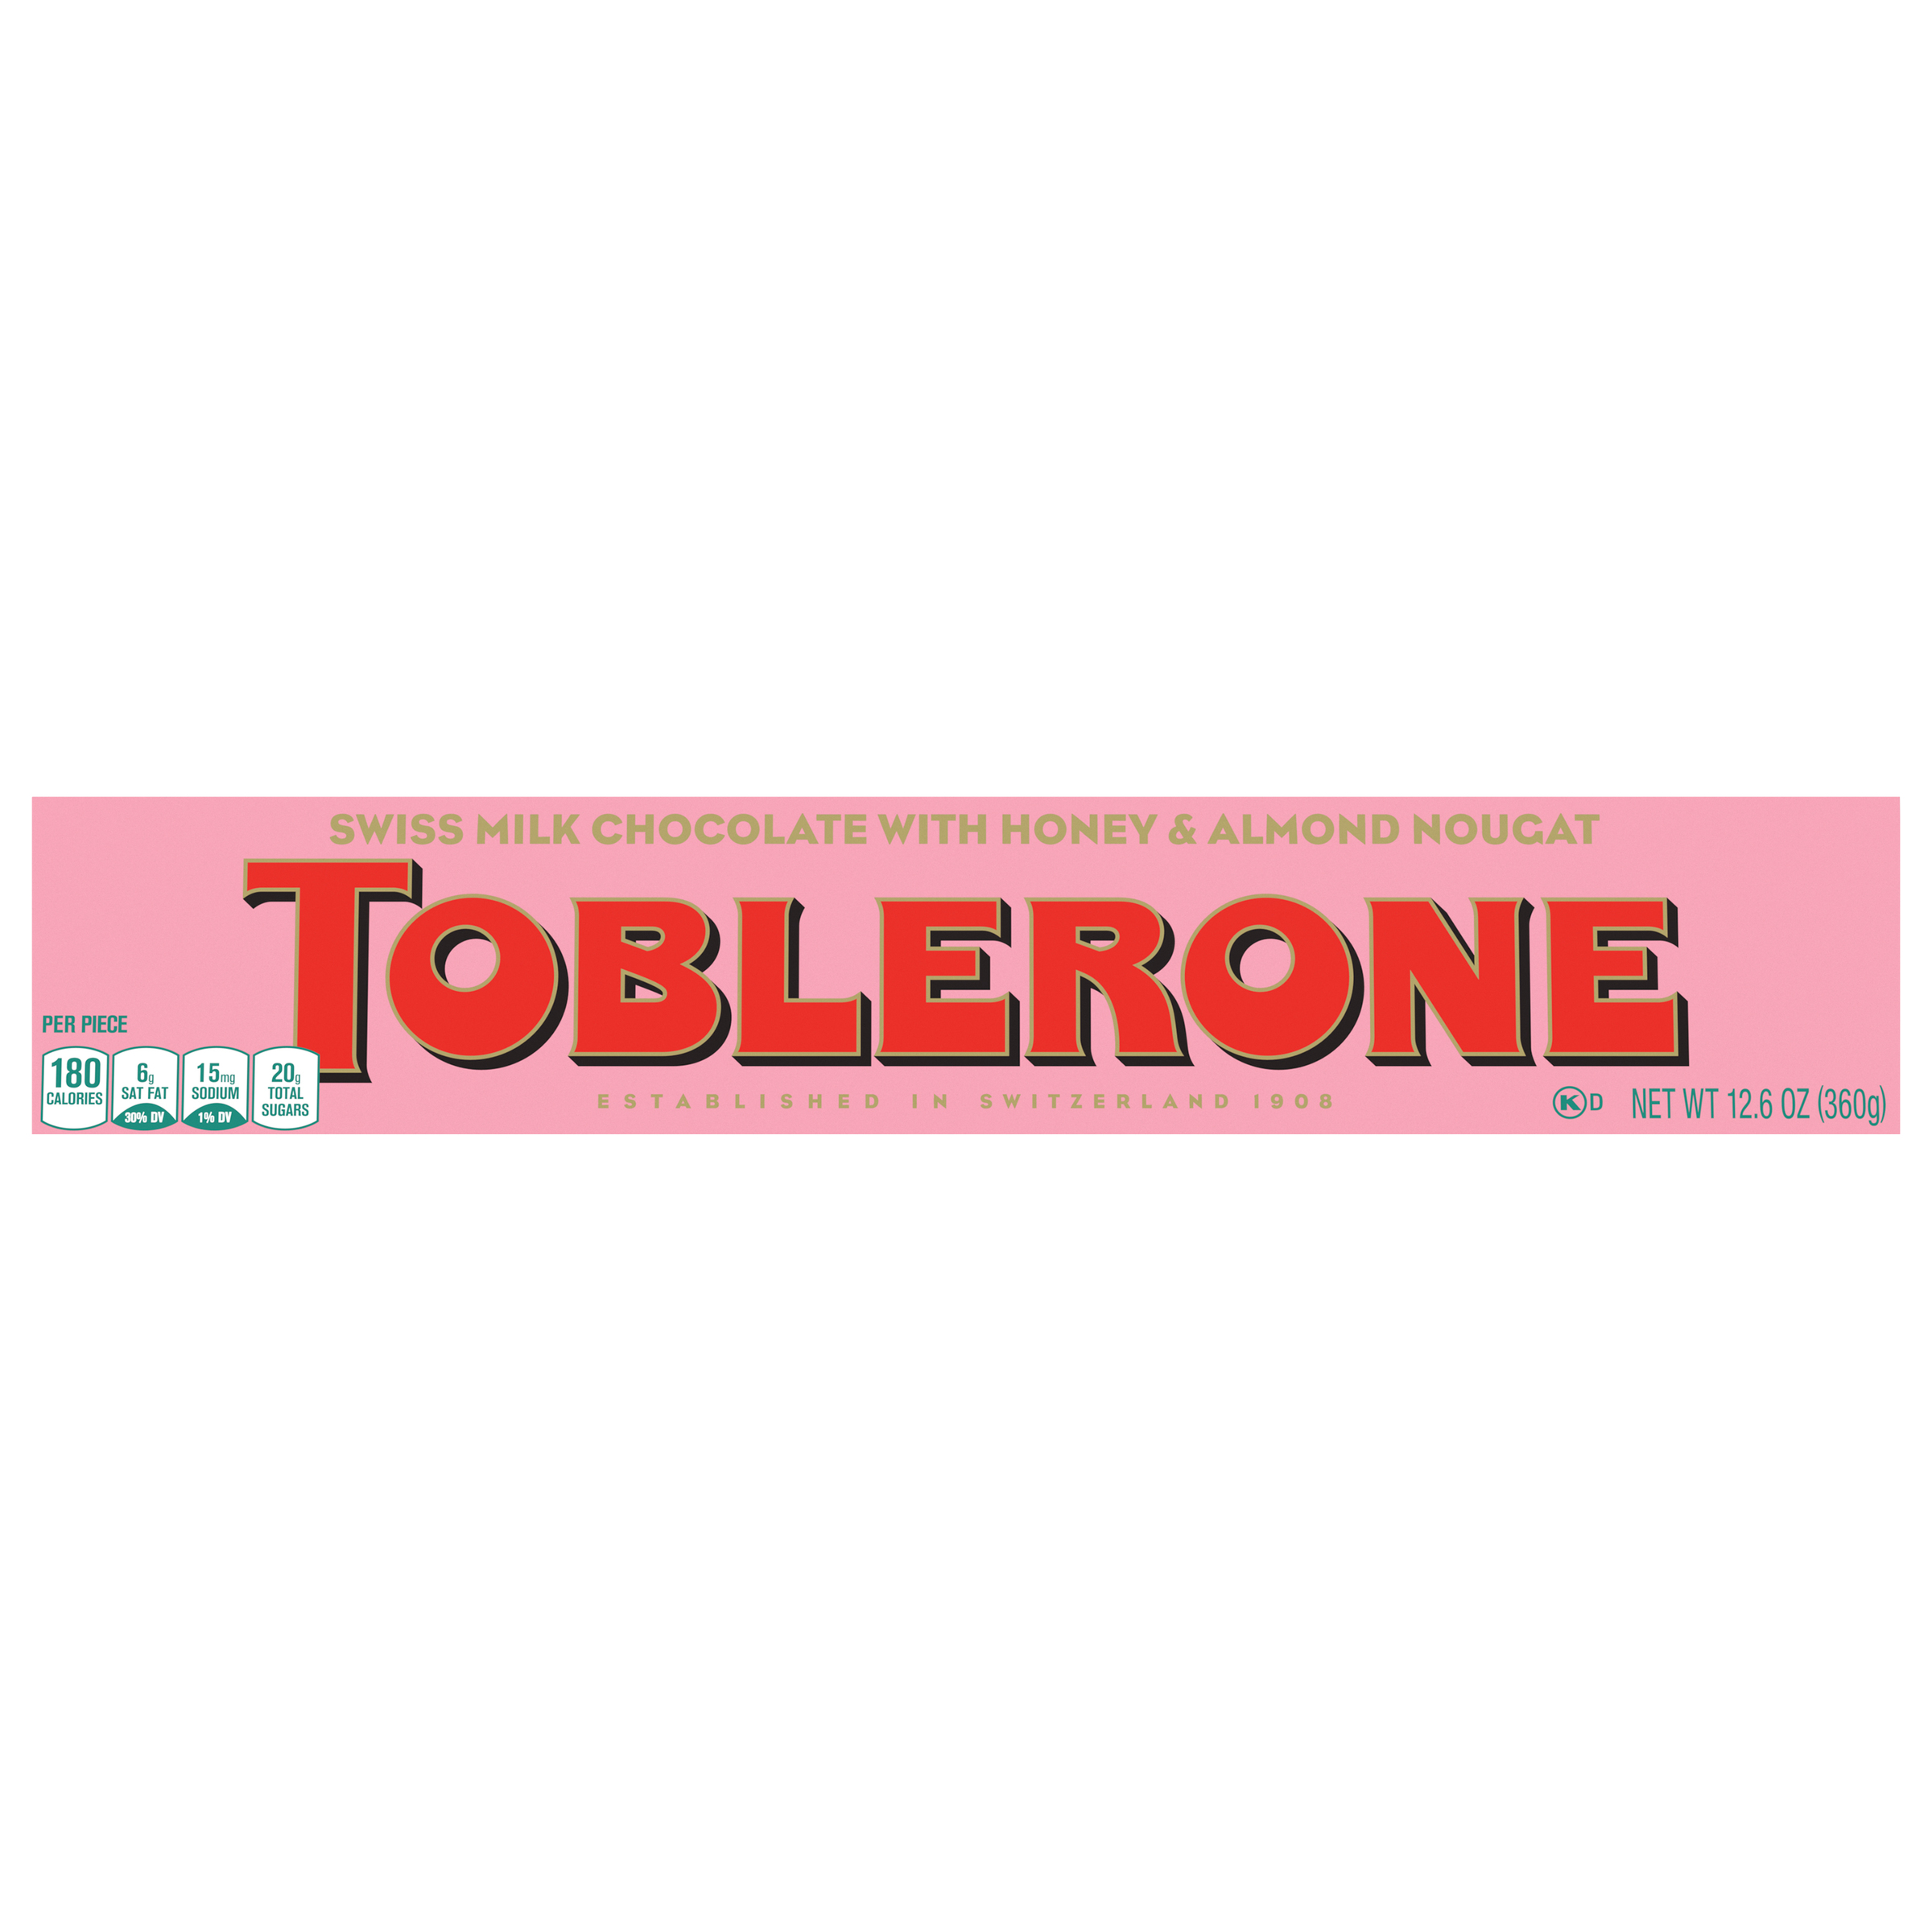 Toblerone Swiss Milk Chocolate Candy Bar with Honey and Almond Nougat, Valentines Chocolate, 12.6 oz